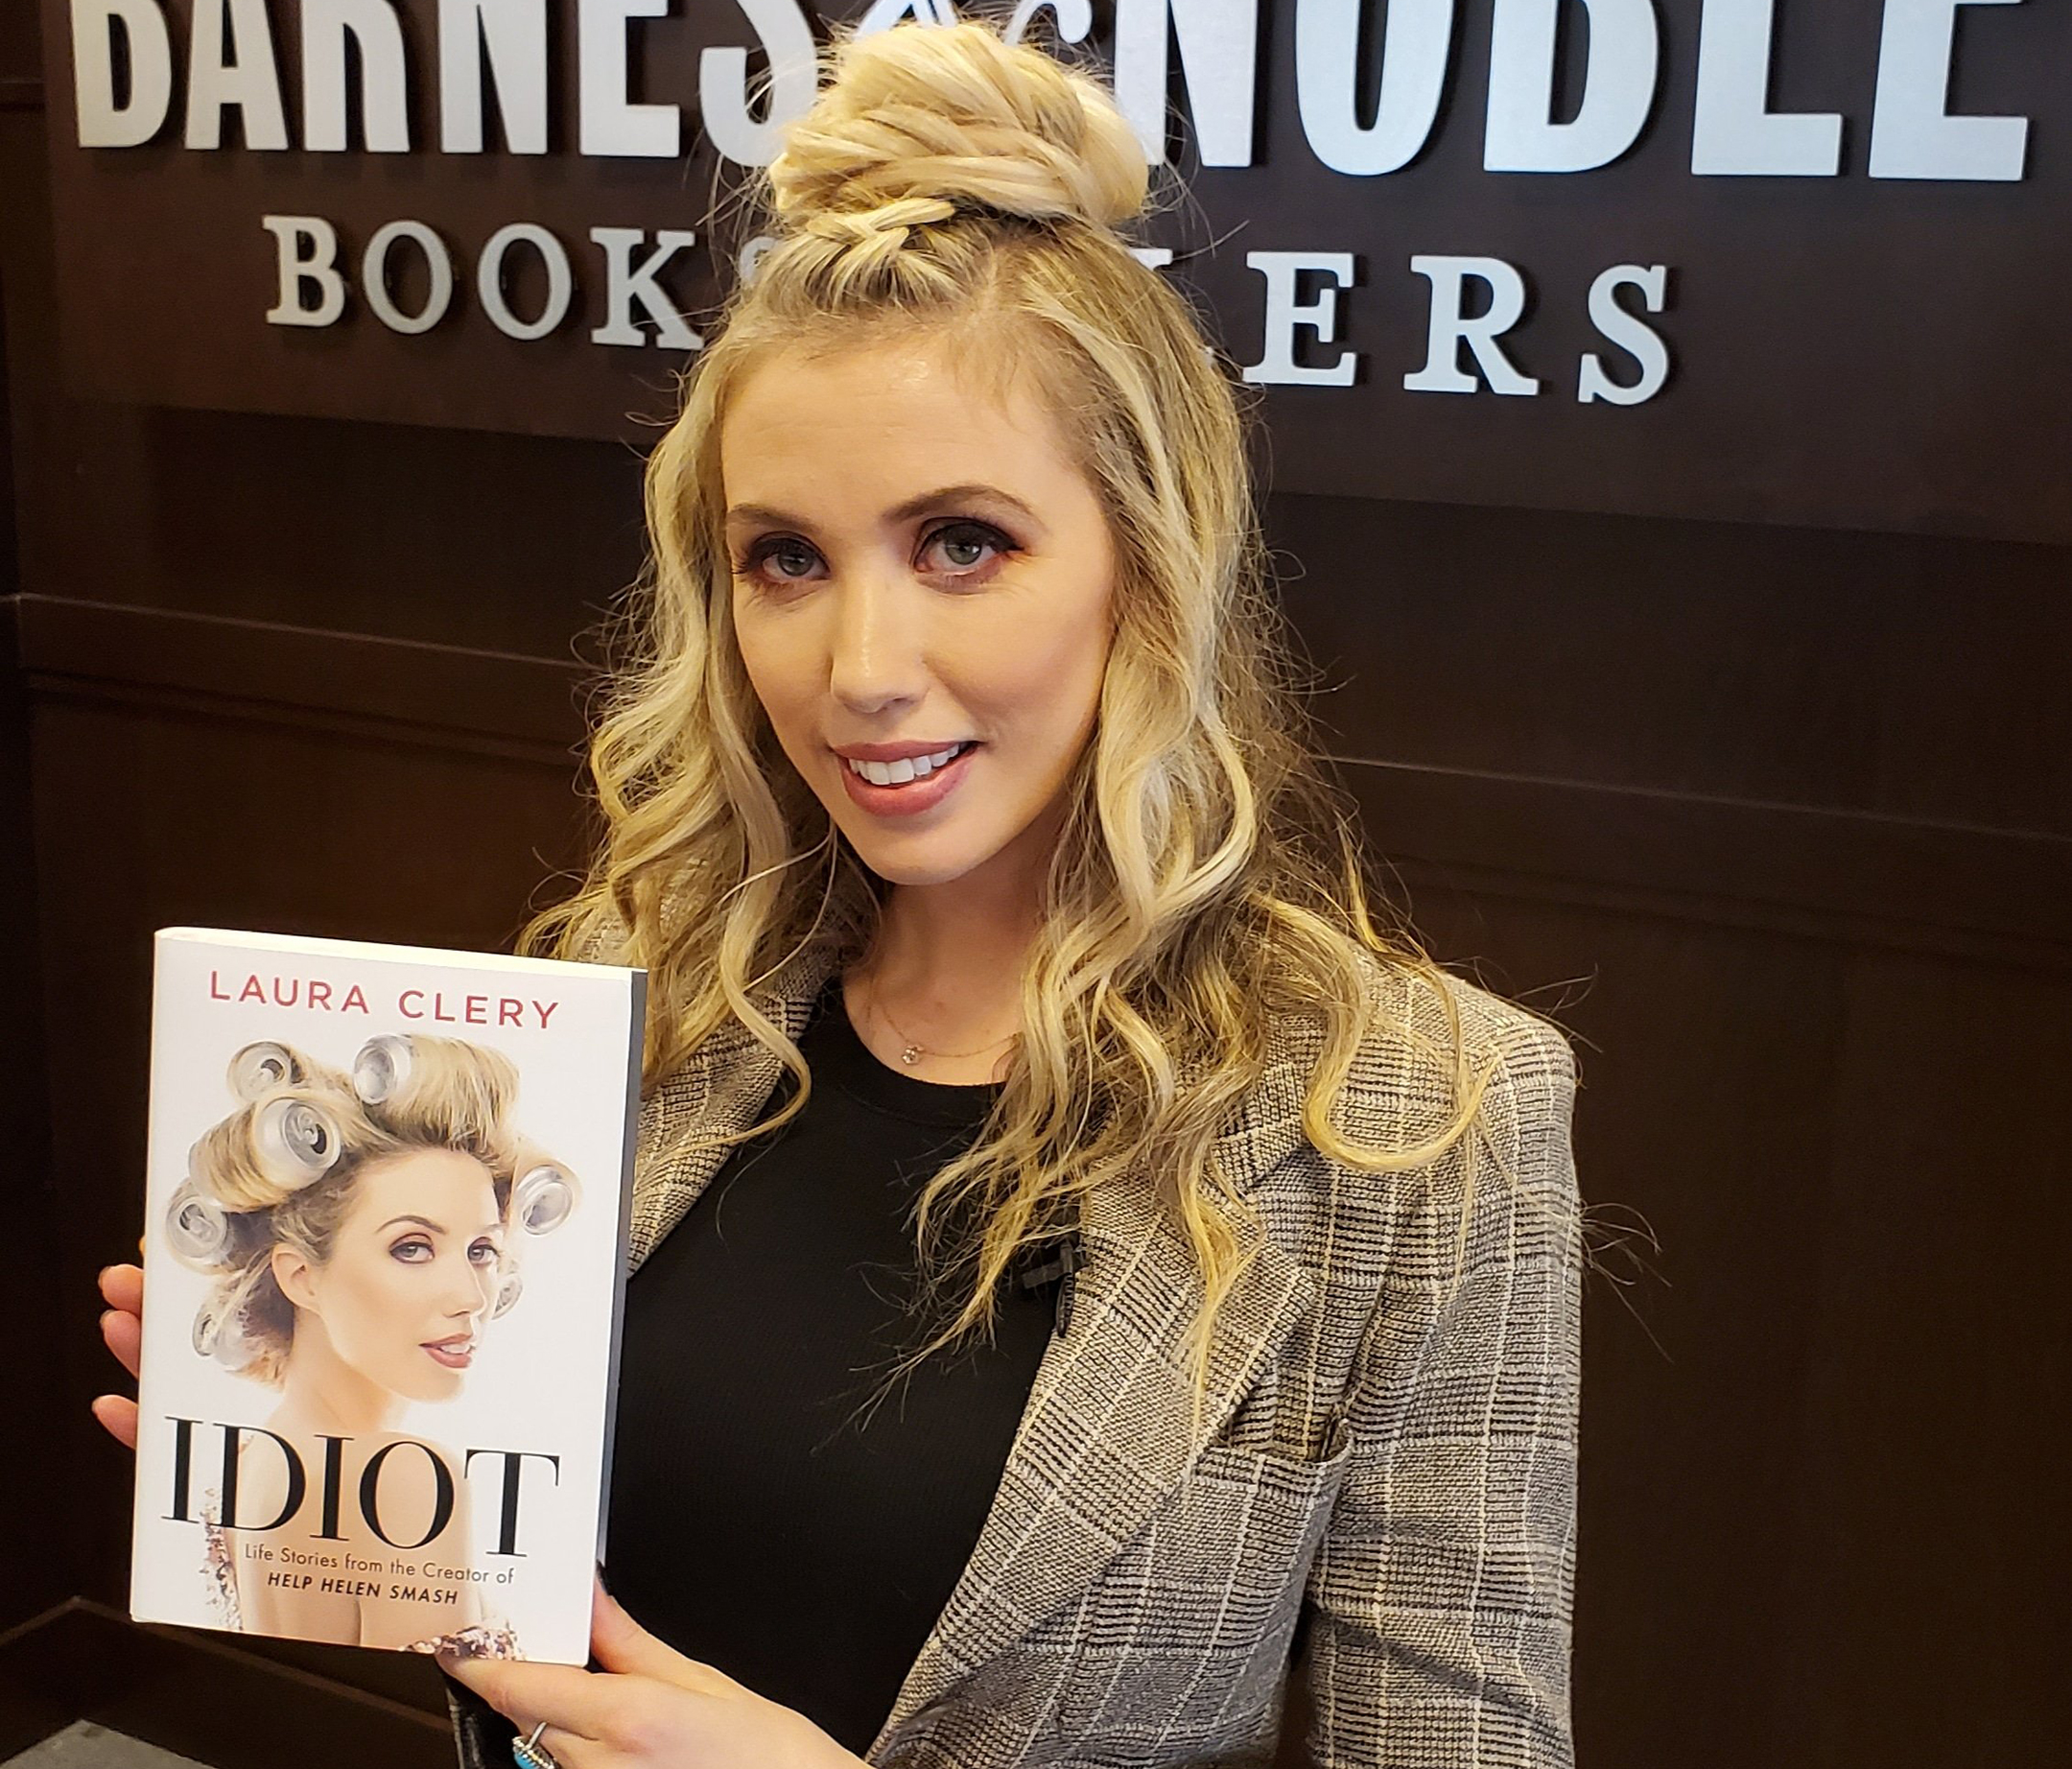 Photo of author Laura Clery holding her book idiot